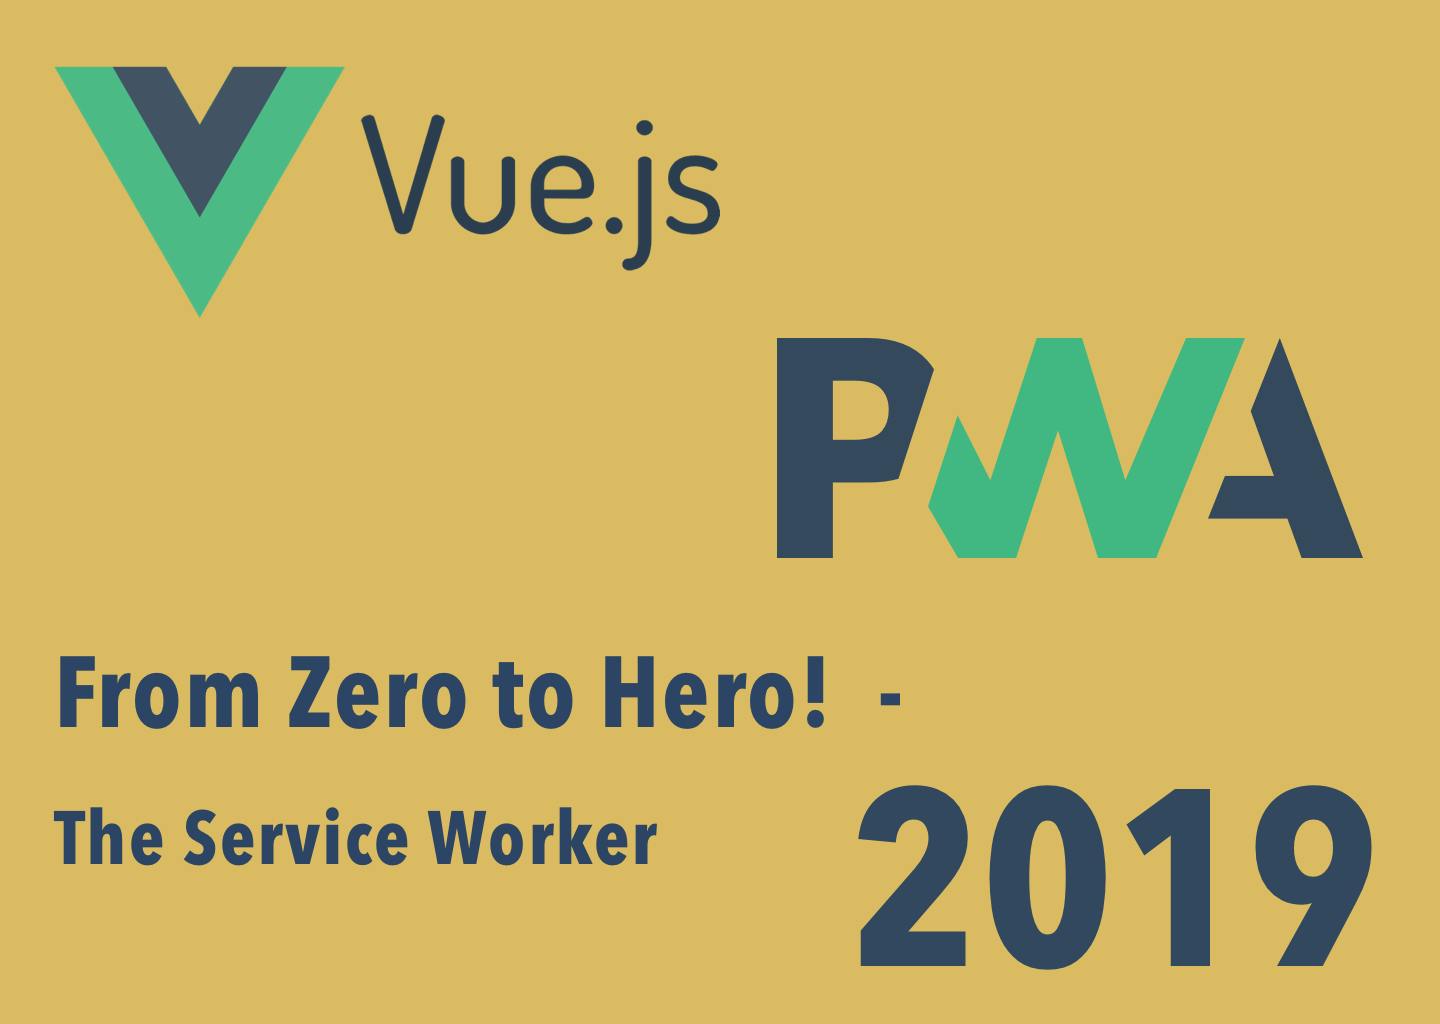 /build-a-progressive-web-app-in-vuejs-from-zero-to-hero-part-2-the-service-worker-d9babc3d756f feature image